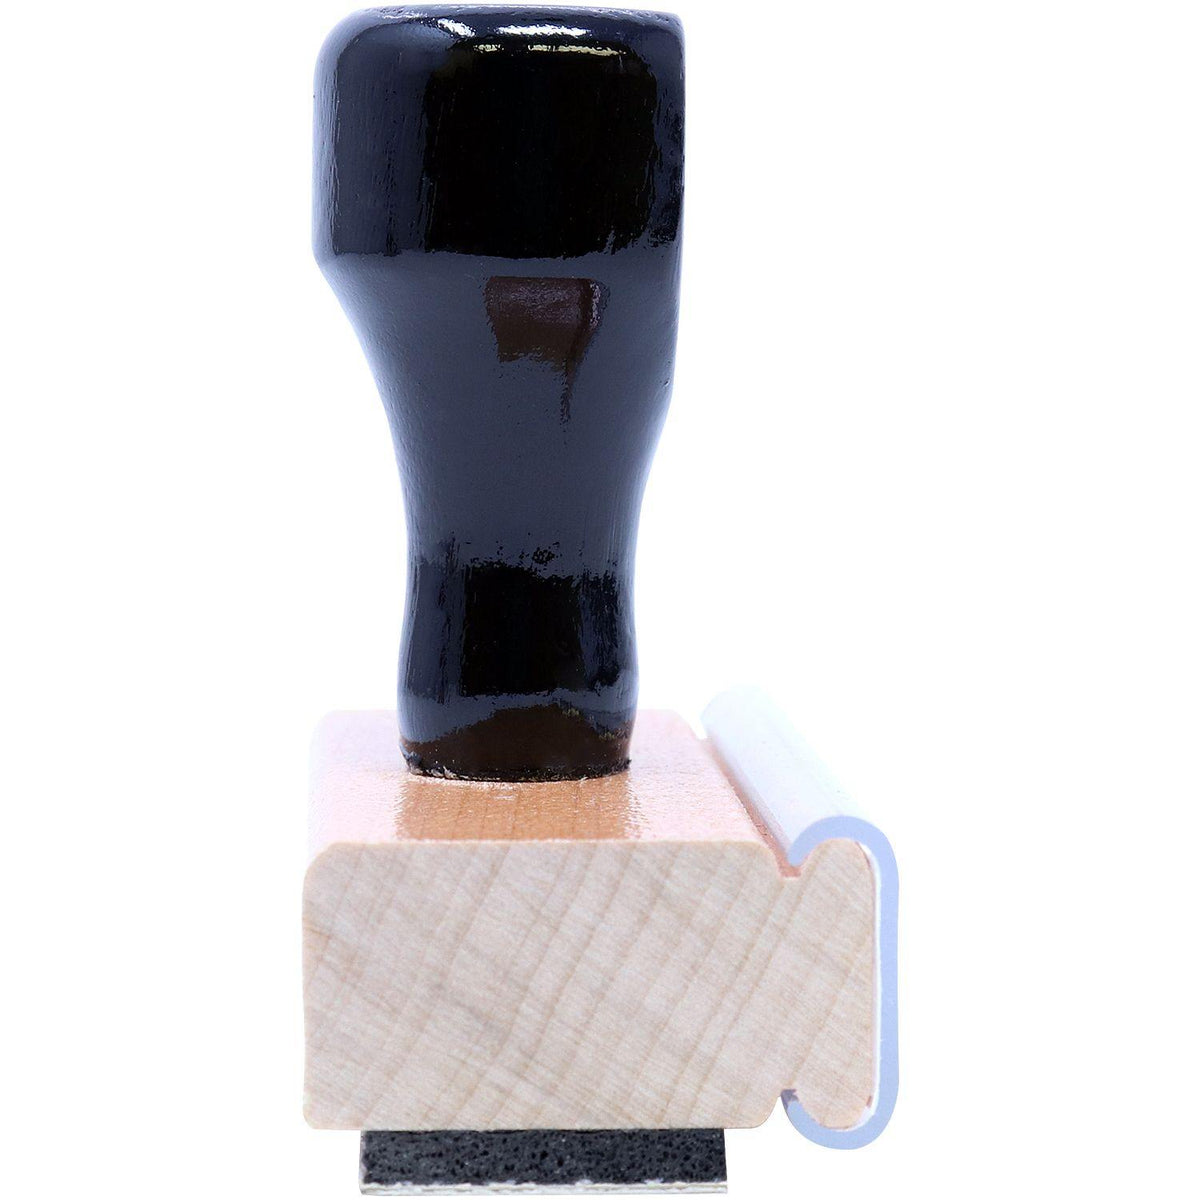 Side View of Large Personal Loans Rubber Stamp